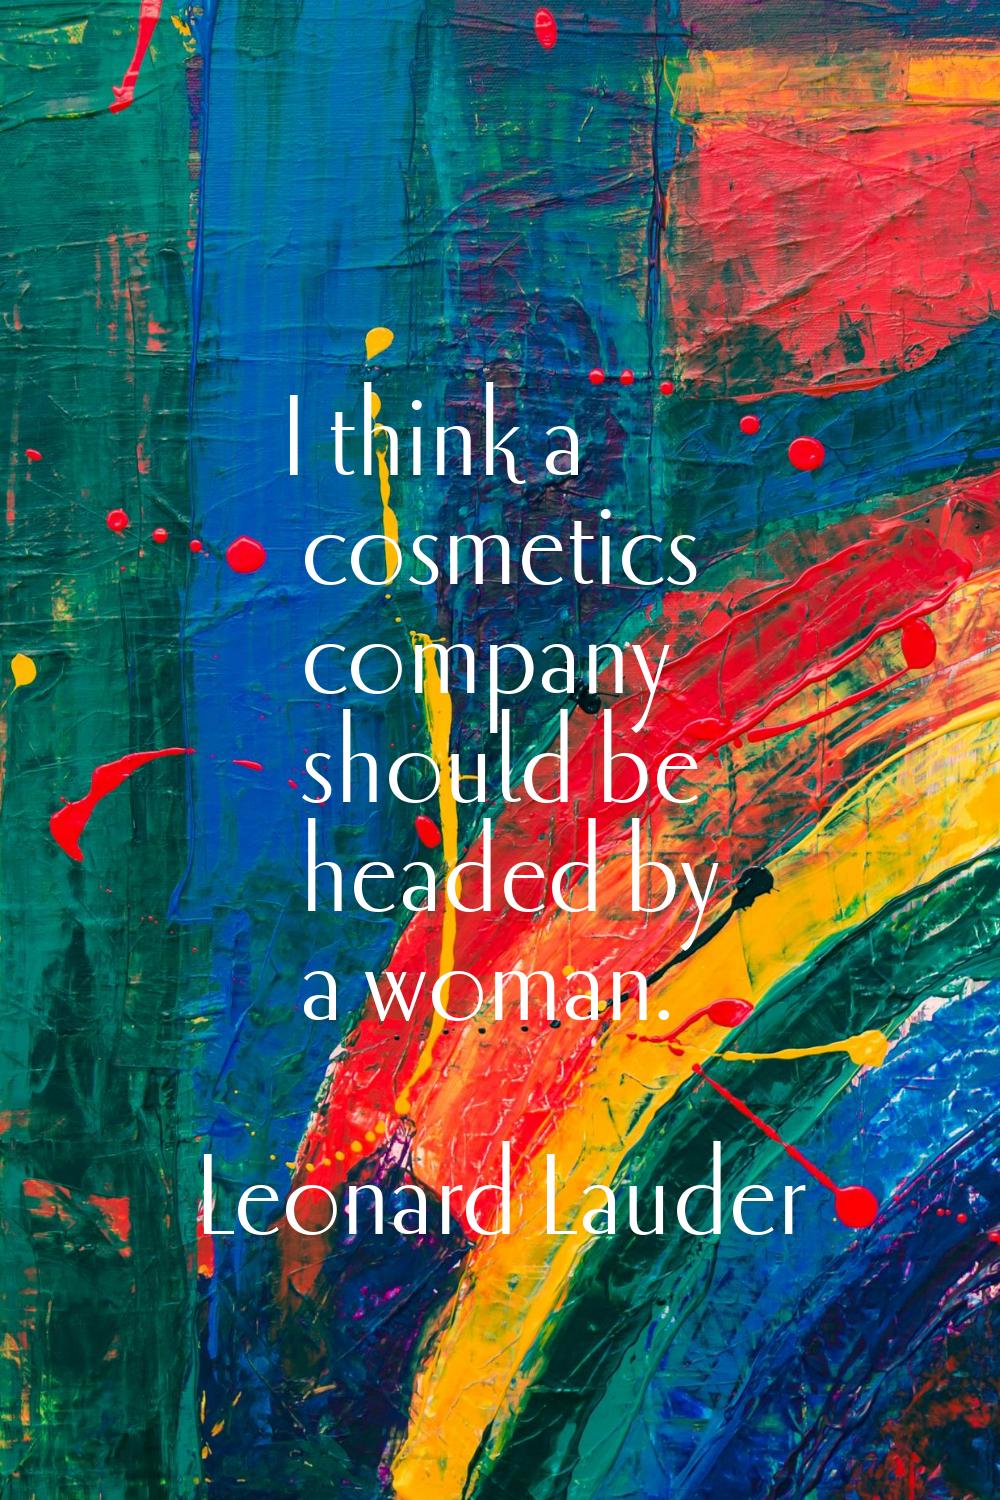 I think a cosmetics company should be headed by a woman.